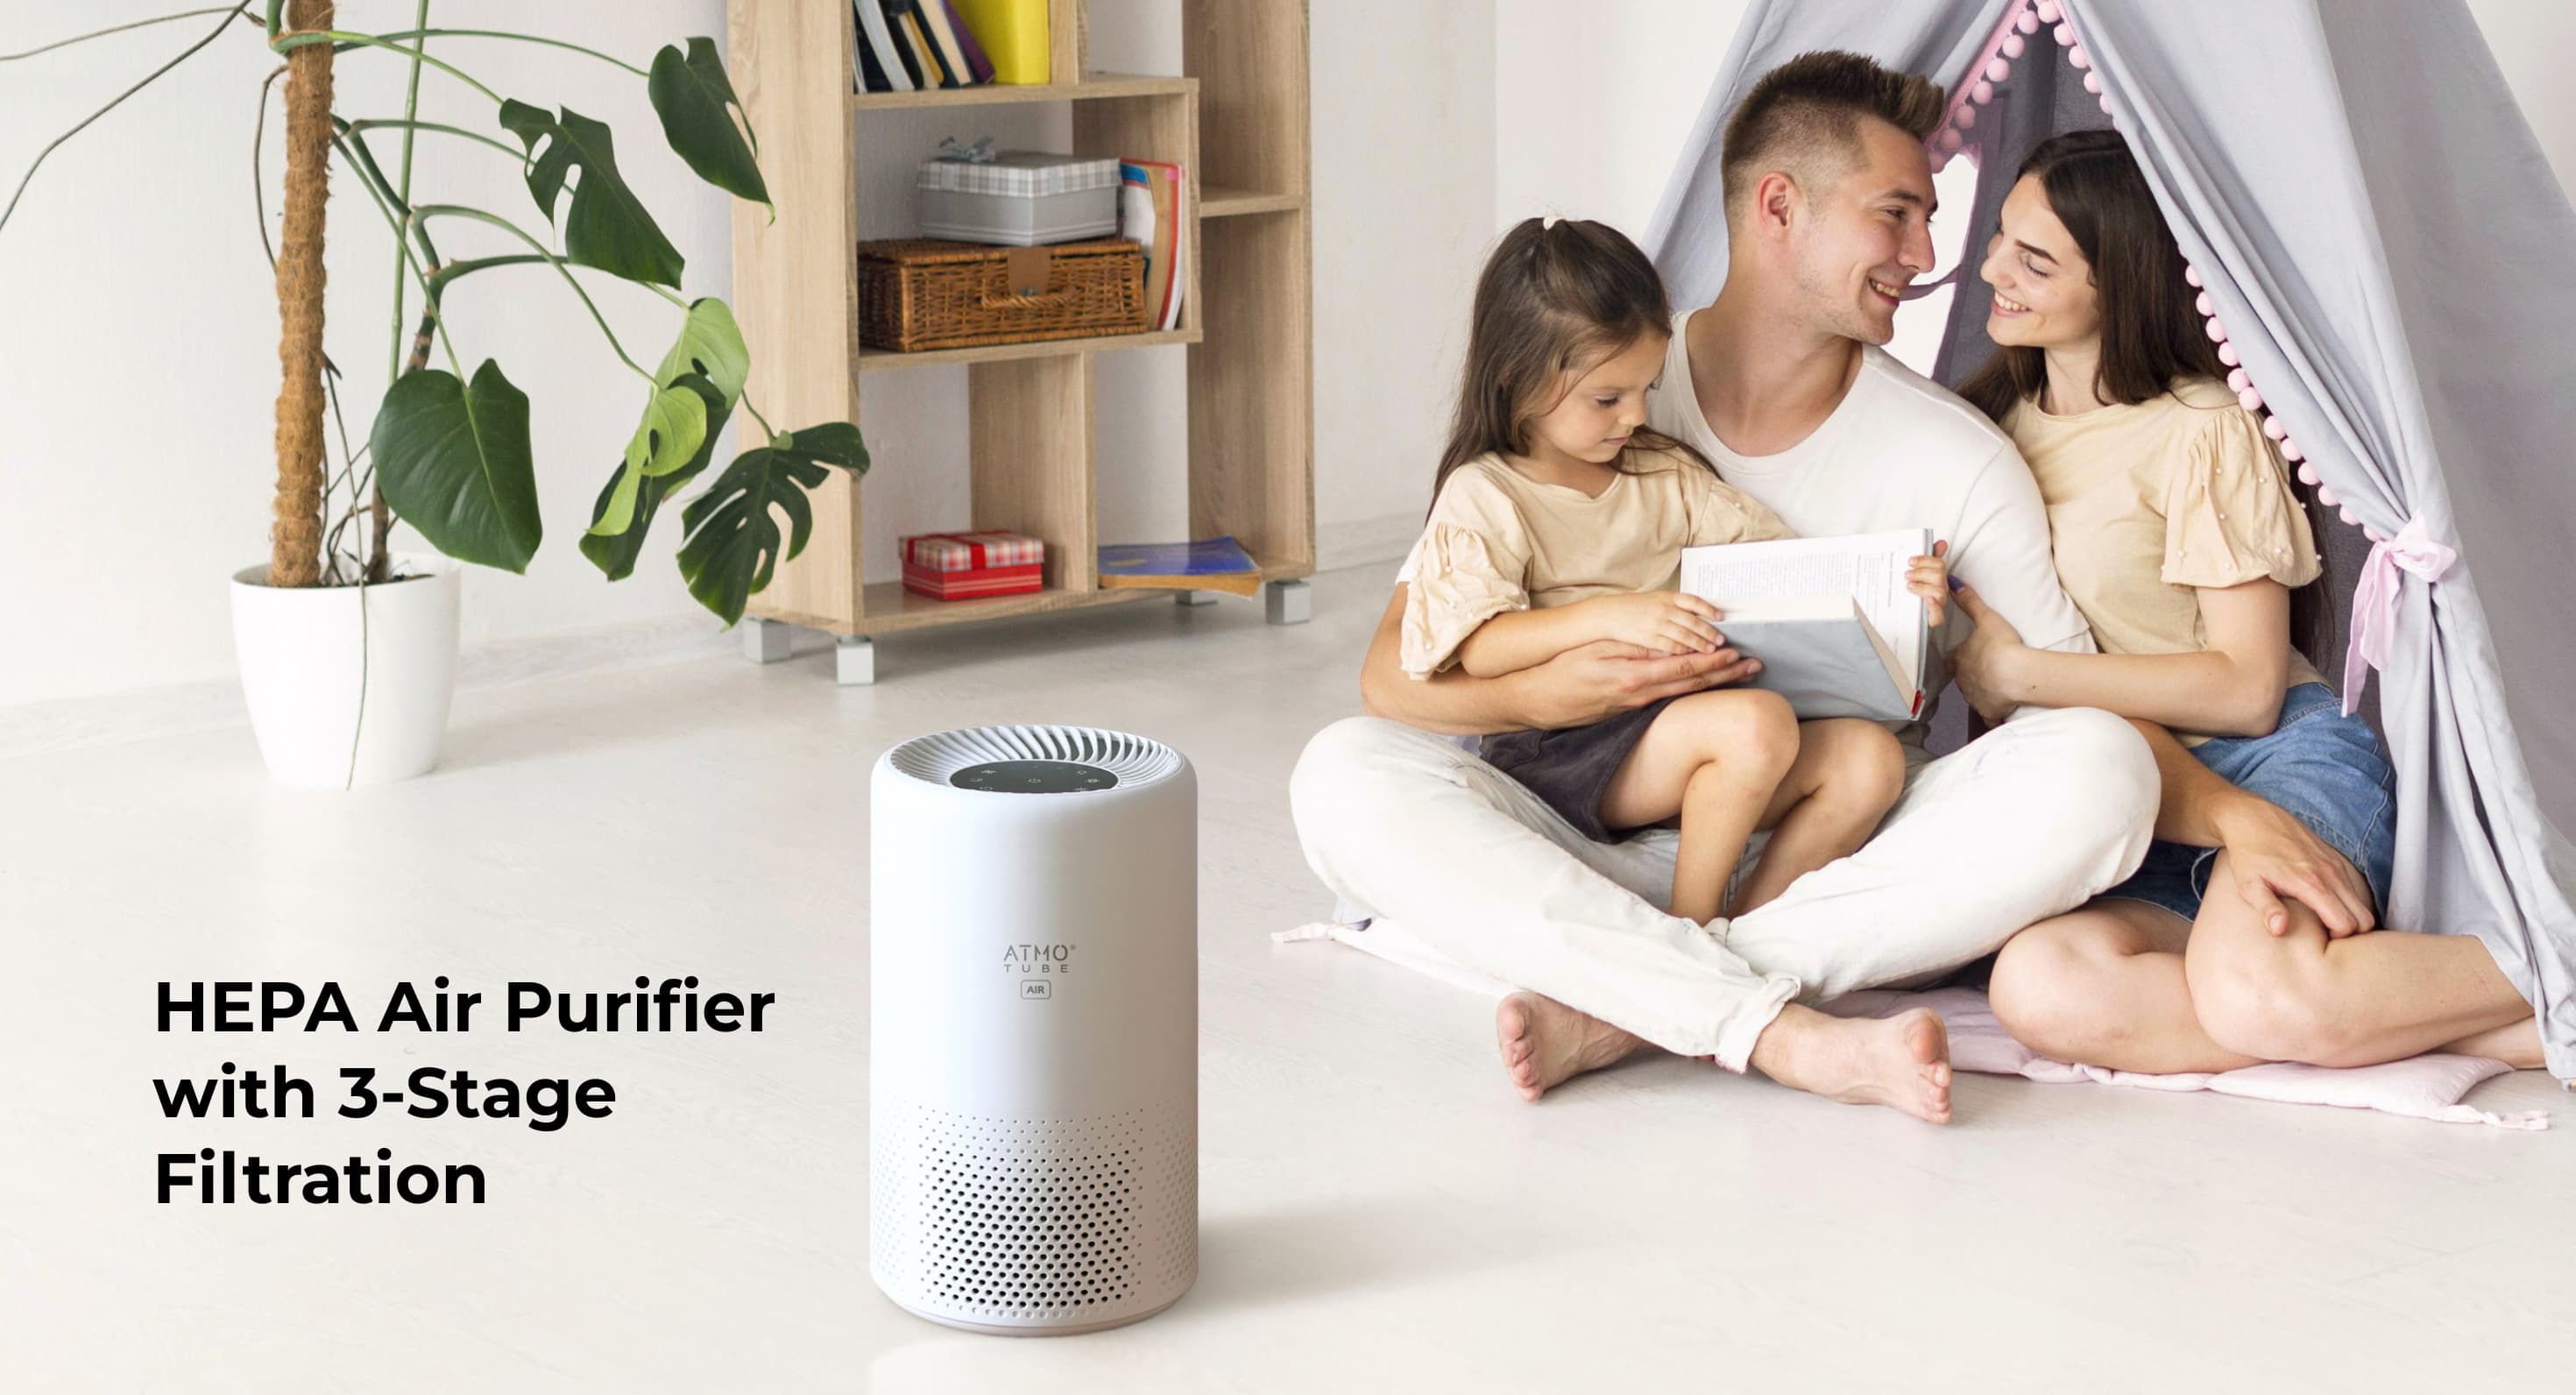 Atmotube AIR® — HEPA Air Purifier with 3-Stage Filtration